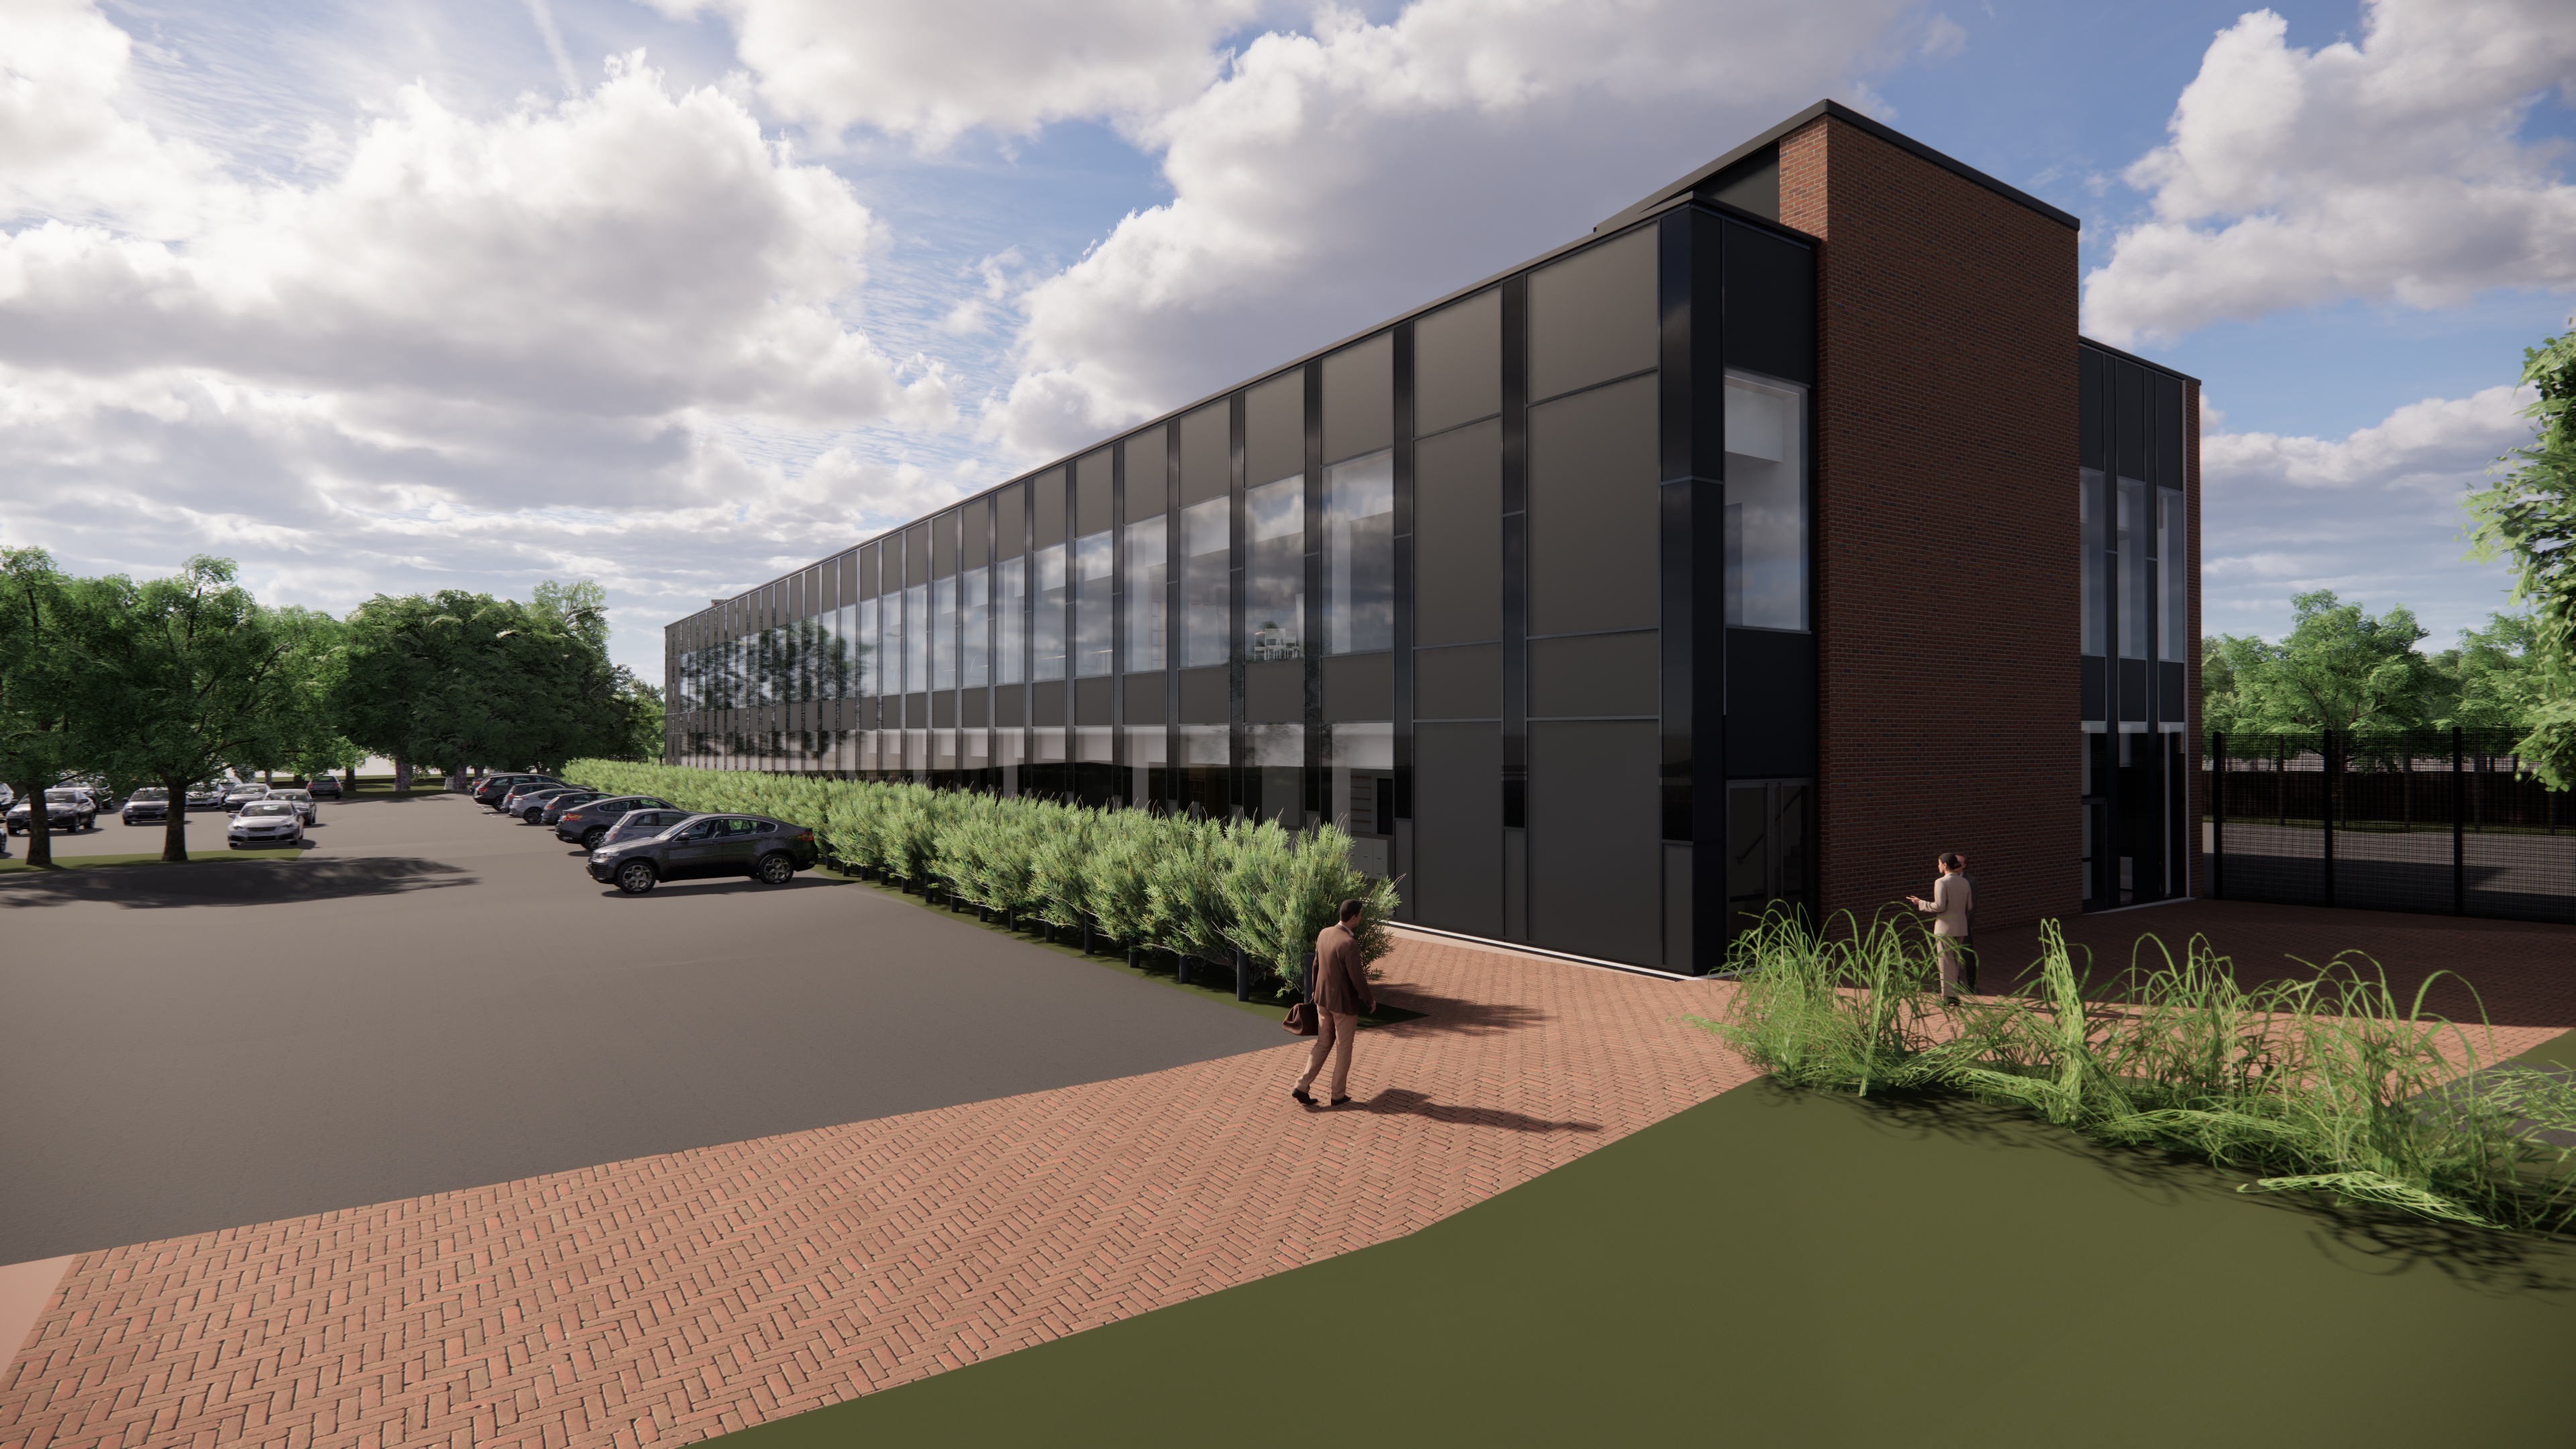 A new HQ building for Bedfordshire police